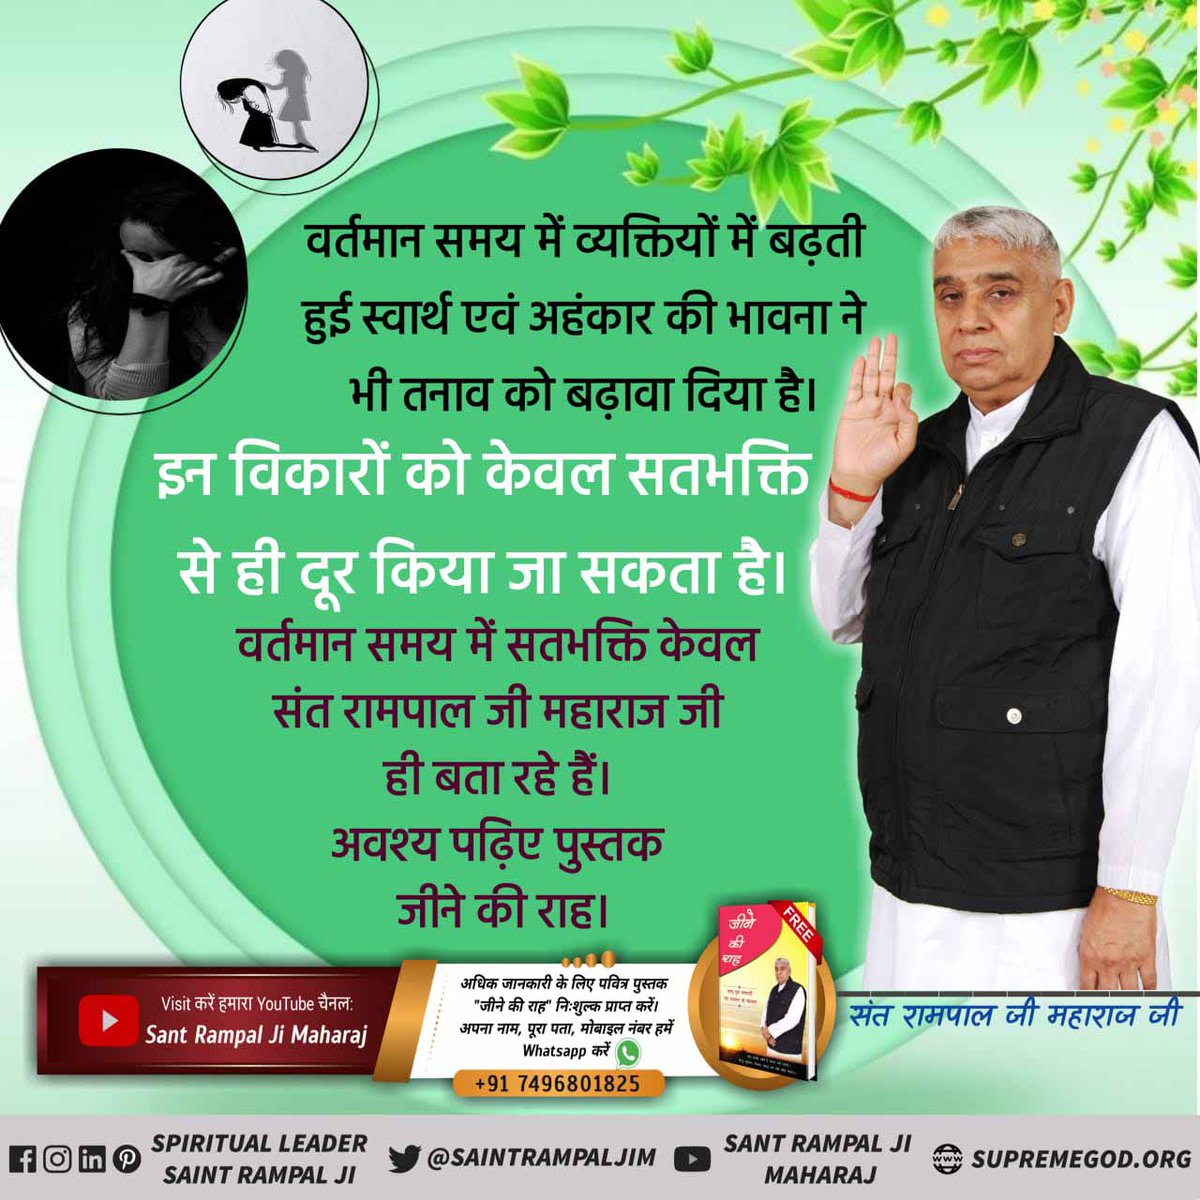 #GodMorningFriday
In the present times, increasing feelings of selfishness and egoism have also promoted stress. These disorders can be overcome only by good faith. At present, only Sant Rampal Ji Maharaj ji is telling Satbhakti.
#FridayMotivation